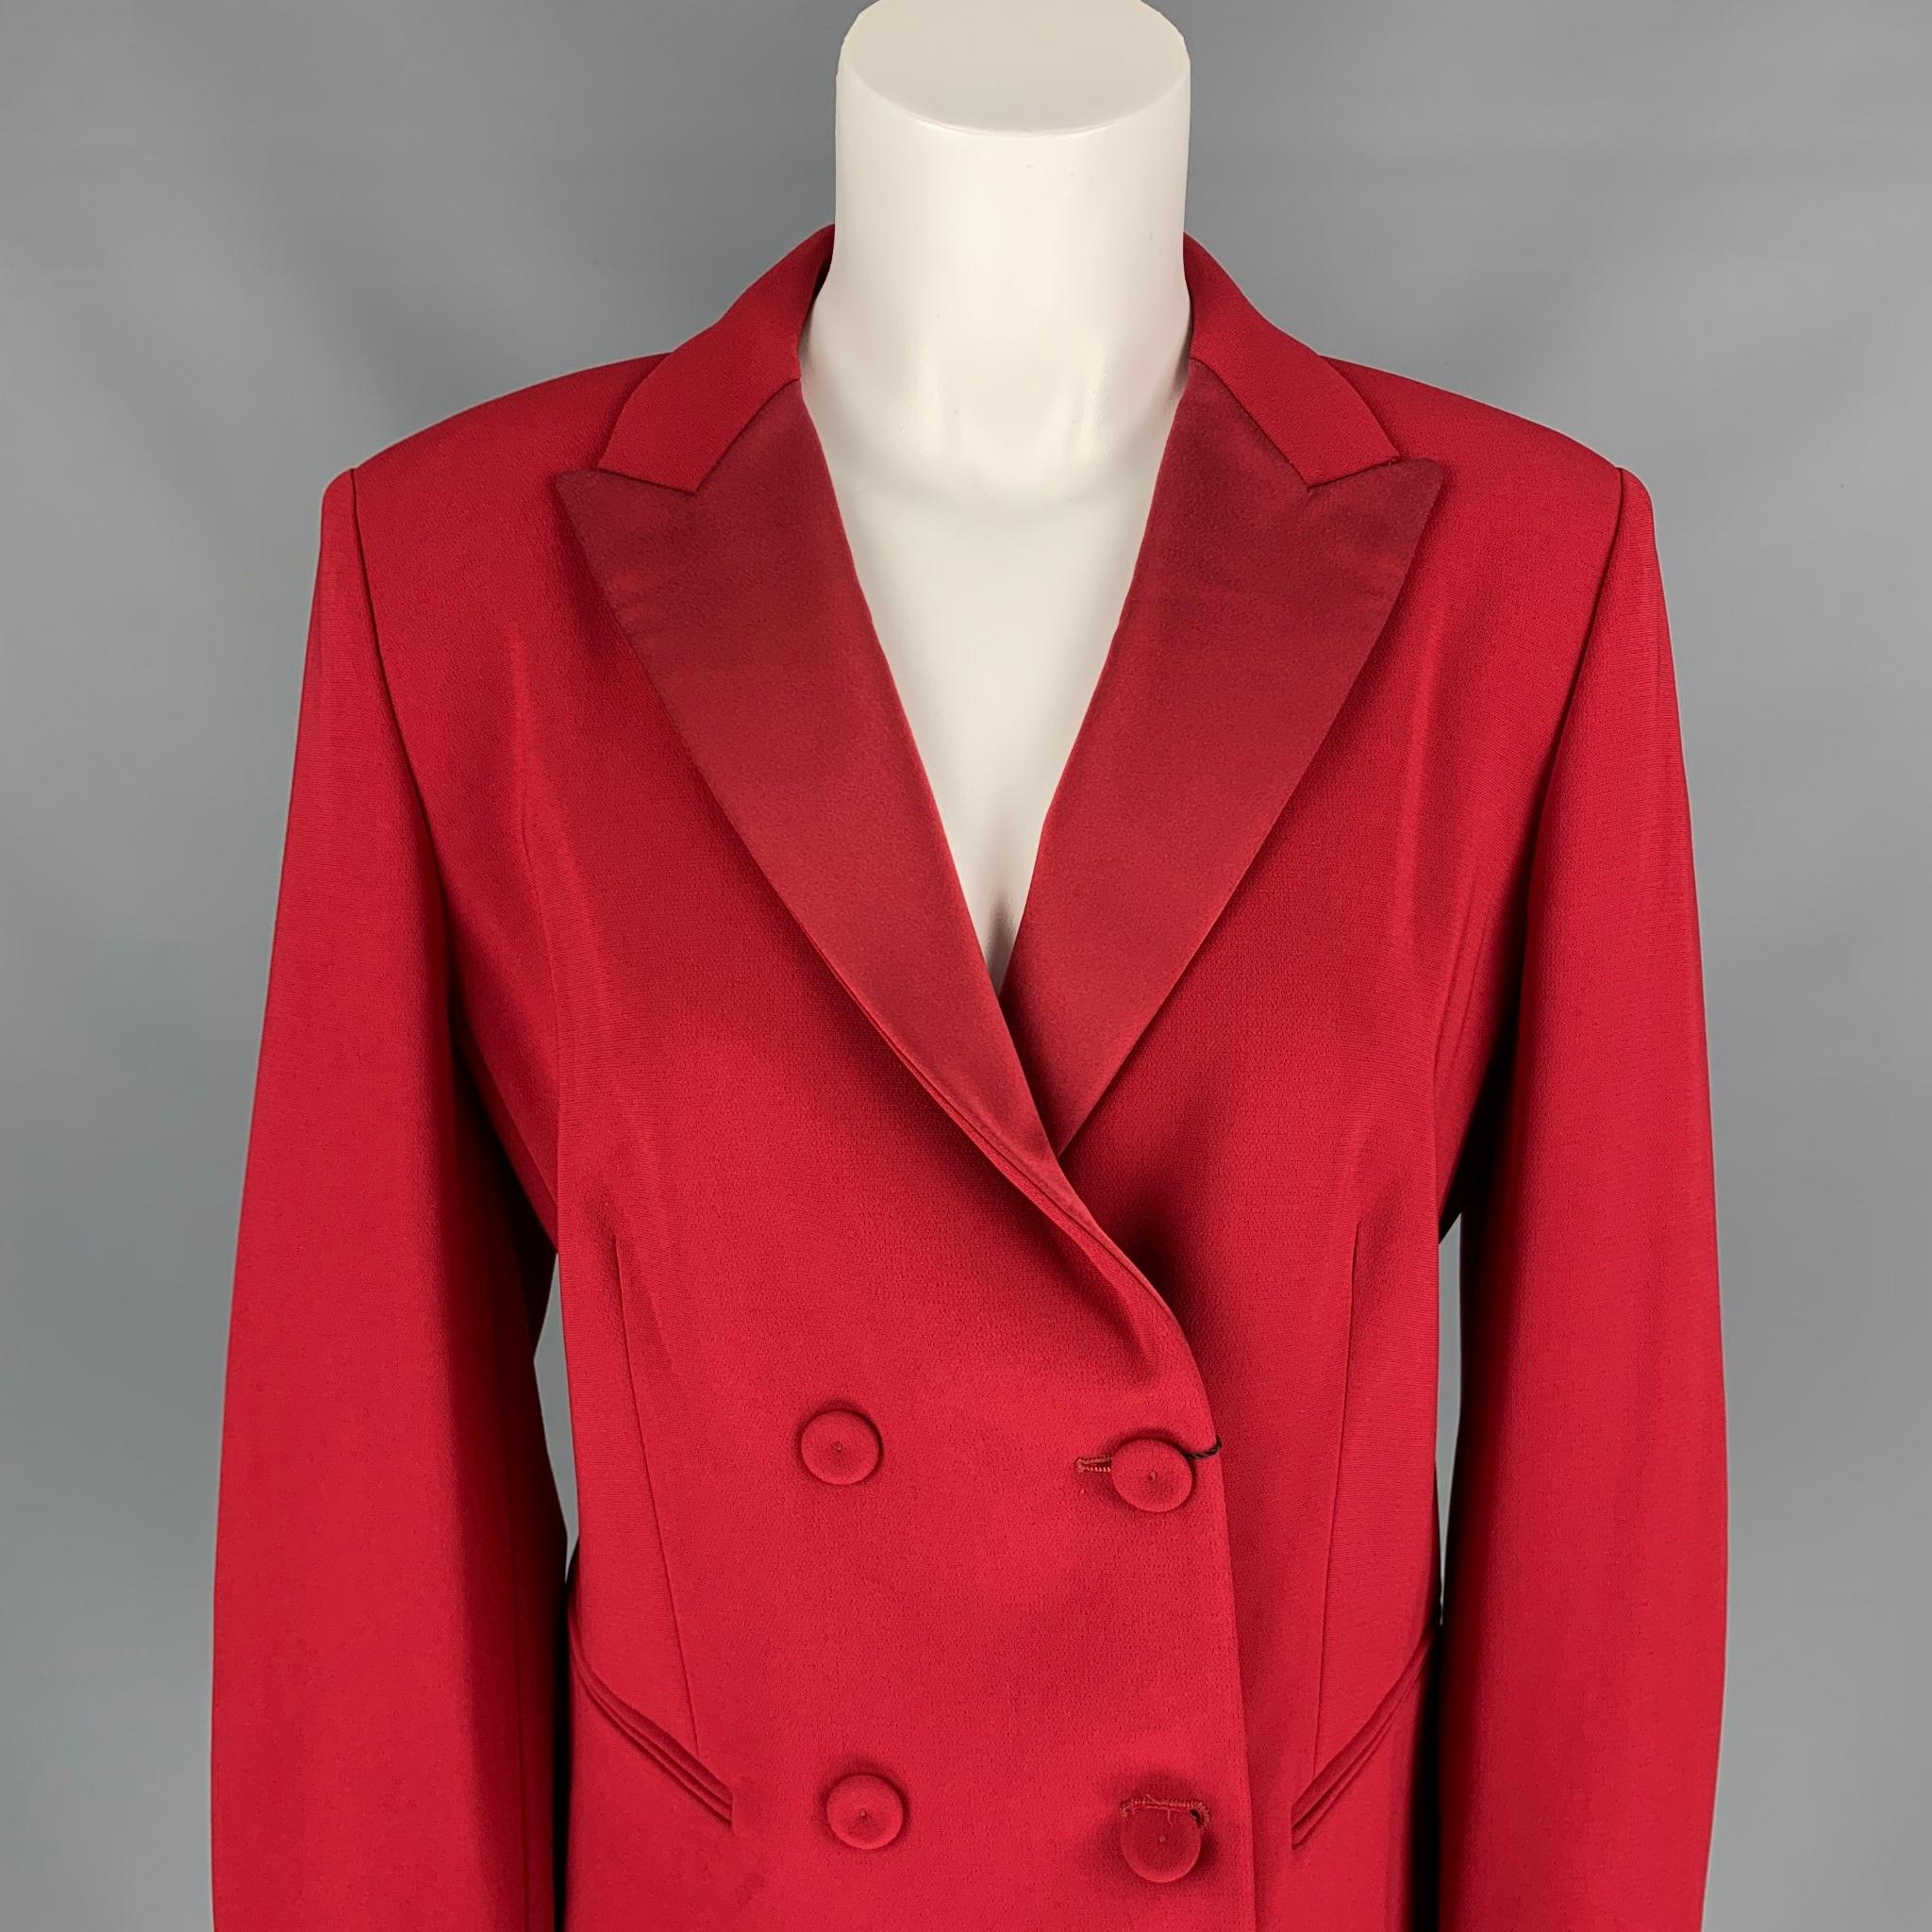 MAX MARA jacket comes in a red triacetate blend with a full liner featuring a peak lapel, slit pockets, and a double breasted closure. Made in Italy.

New With Tags. 
Marked: AD 42 / USA 12 / FB 44 / MEX 34 / GB 14 / IJ 46
Original Retail Price: